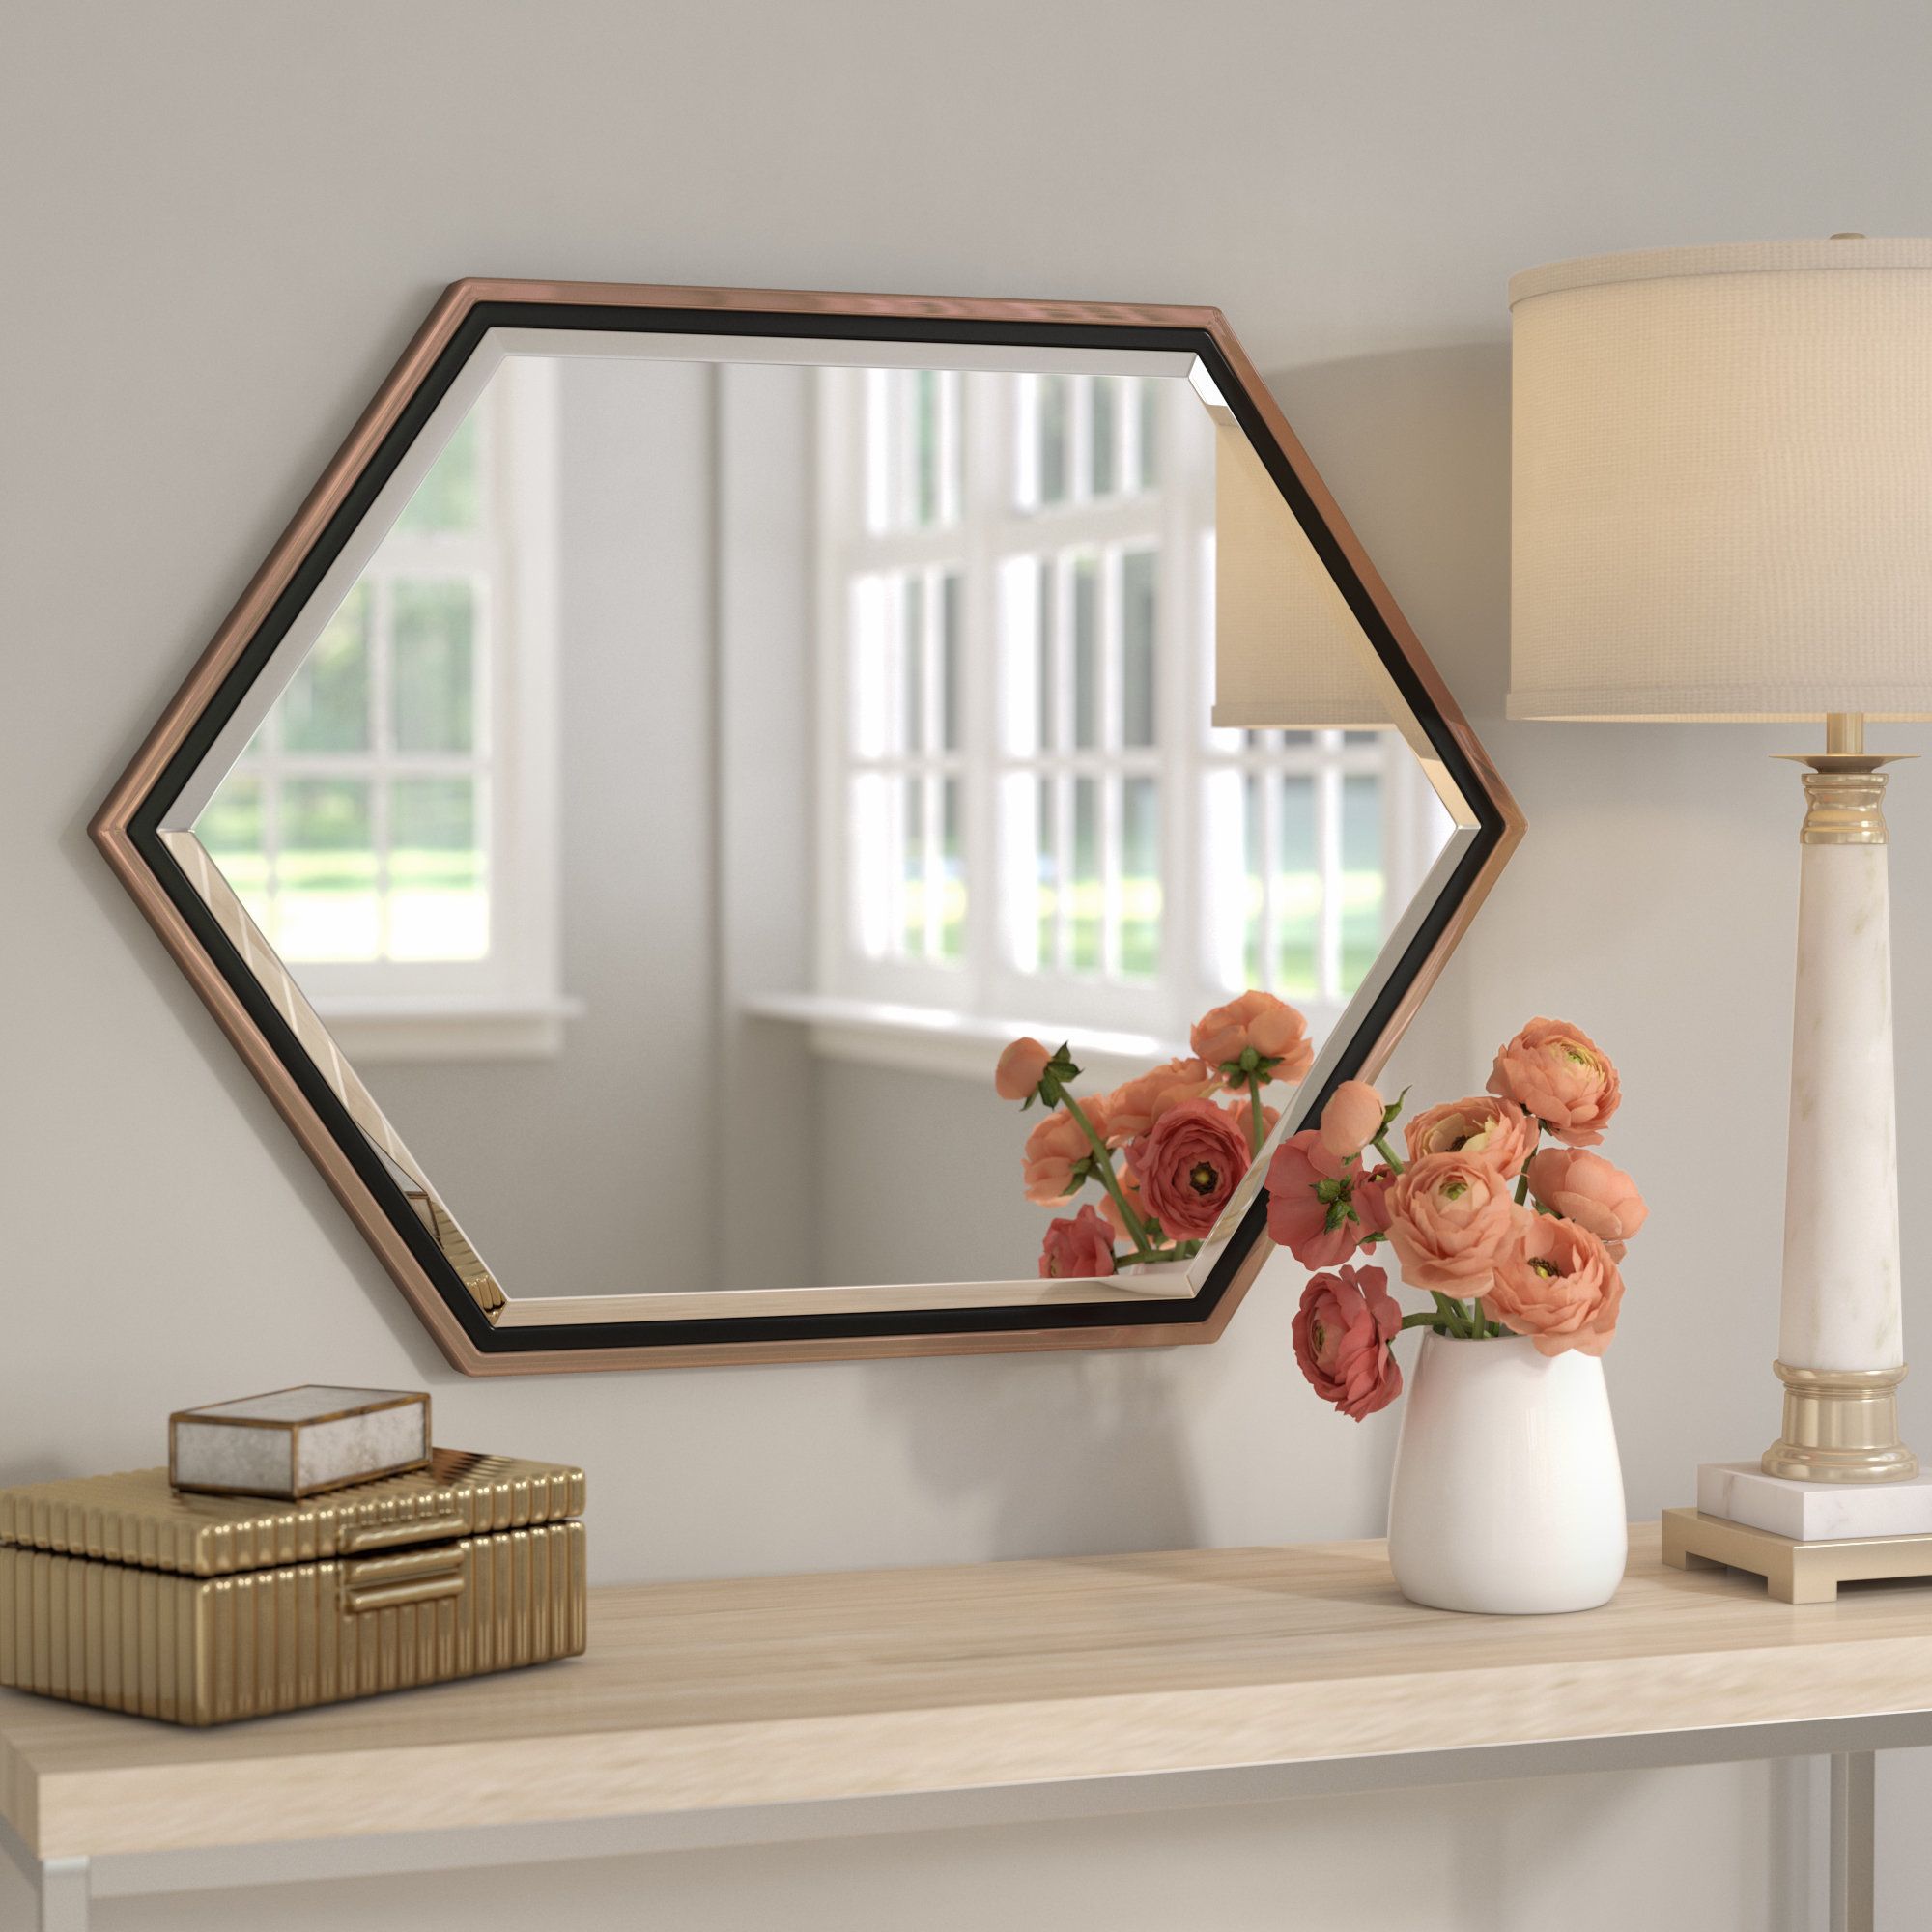 Most Recent Contemporary Metal Frame Accent Wall Mirror Regarding Metal Frame Wall Mirrors (View 3 of 20)